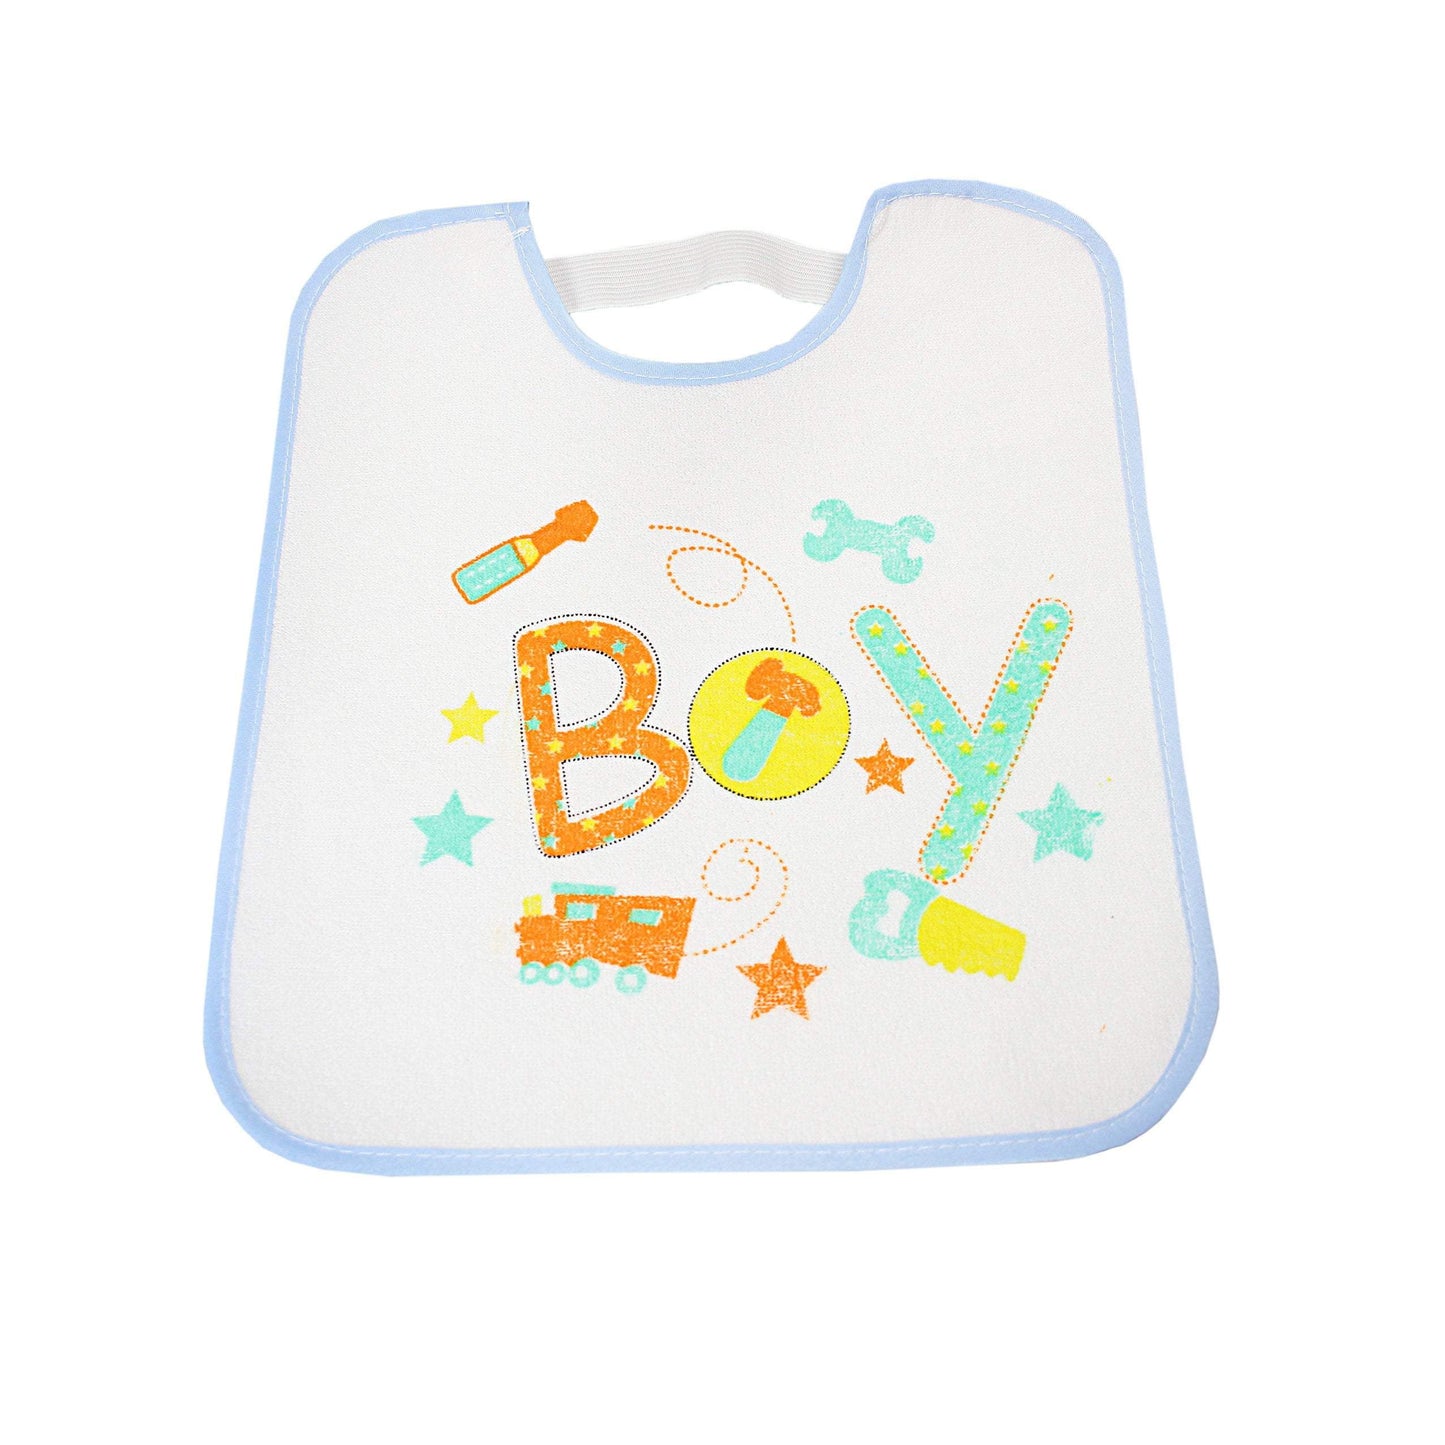 Baby Apron Bib Assorted Designs 4980 (Large Letter Rate)